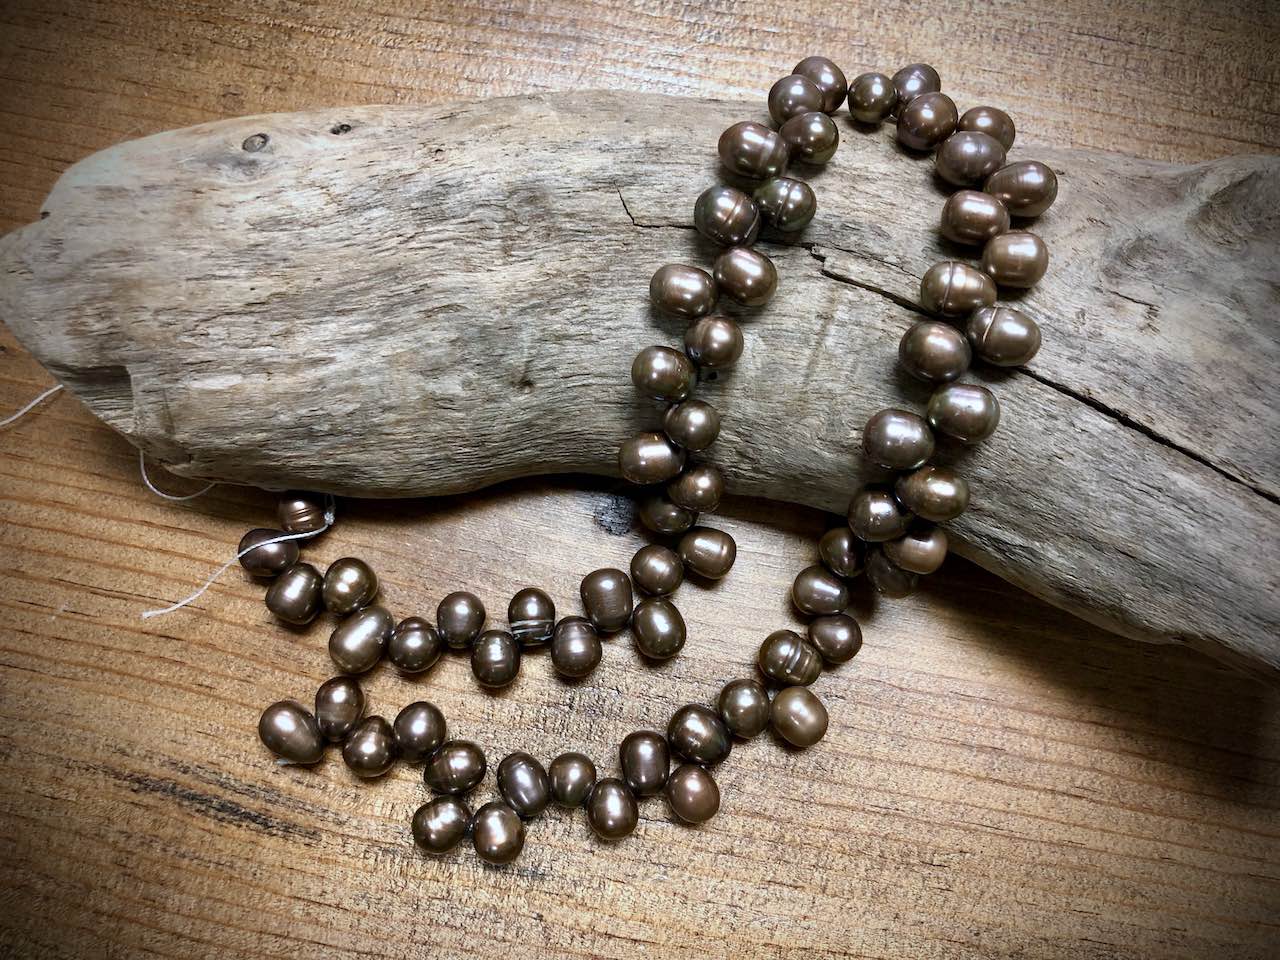 Old-Stock, Vintage Freshwater Pearls - 10mm x 7mm - 16”